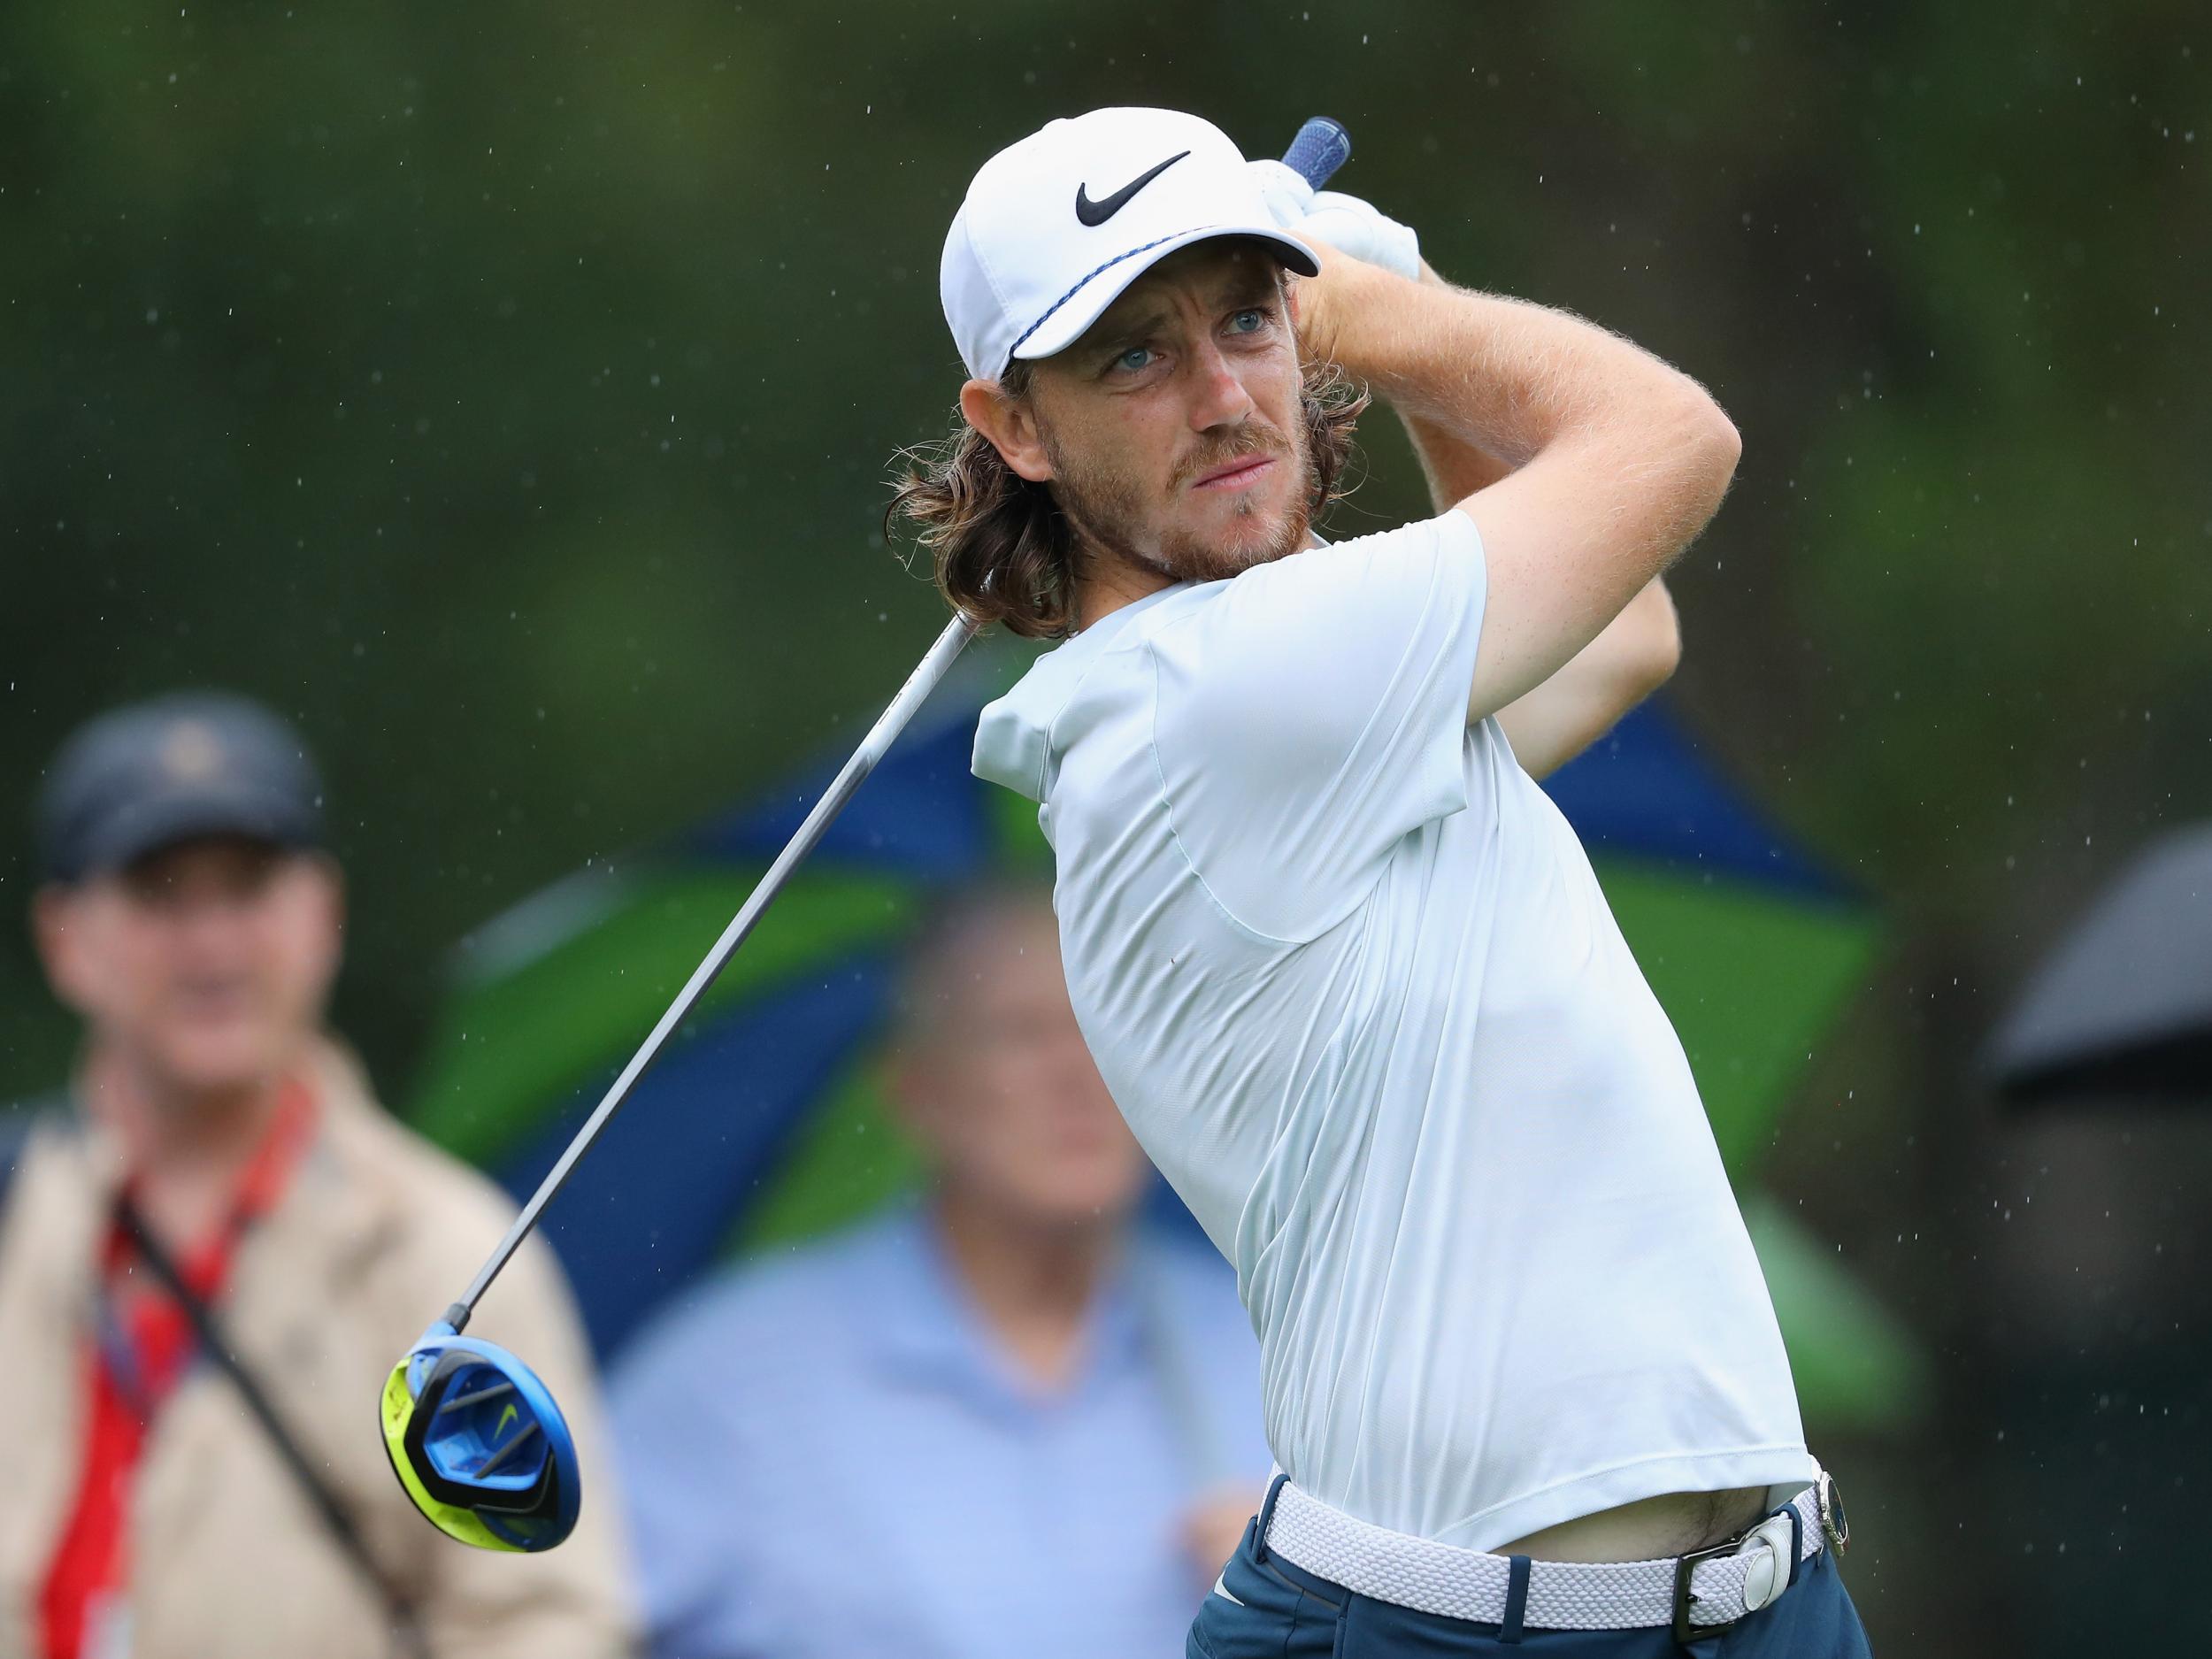 England's Tommy Fleetwood shot an opening round 70 at Quail Hollow